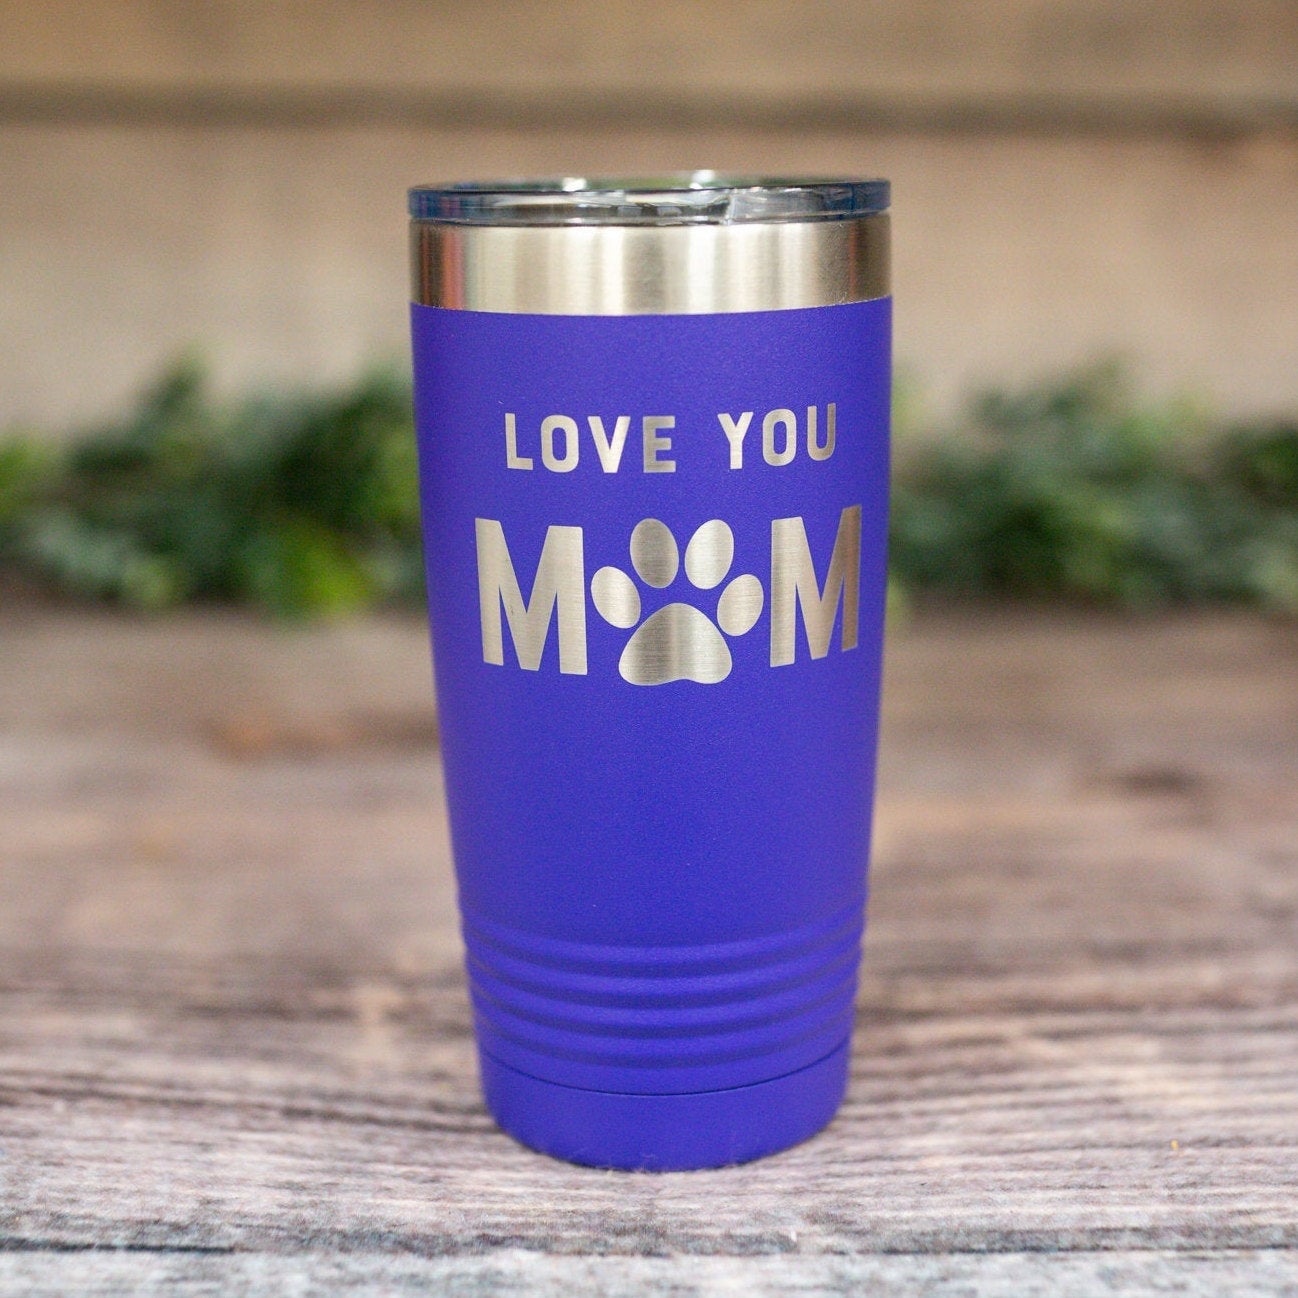 My Kids Have Paws – Engraved Stainless Steel Travel Mug Cup, Animal Lover  Gift, Dog Travel Mug With Lid – 3C Etching LTD